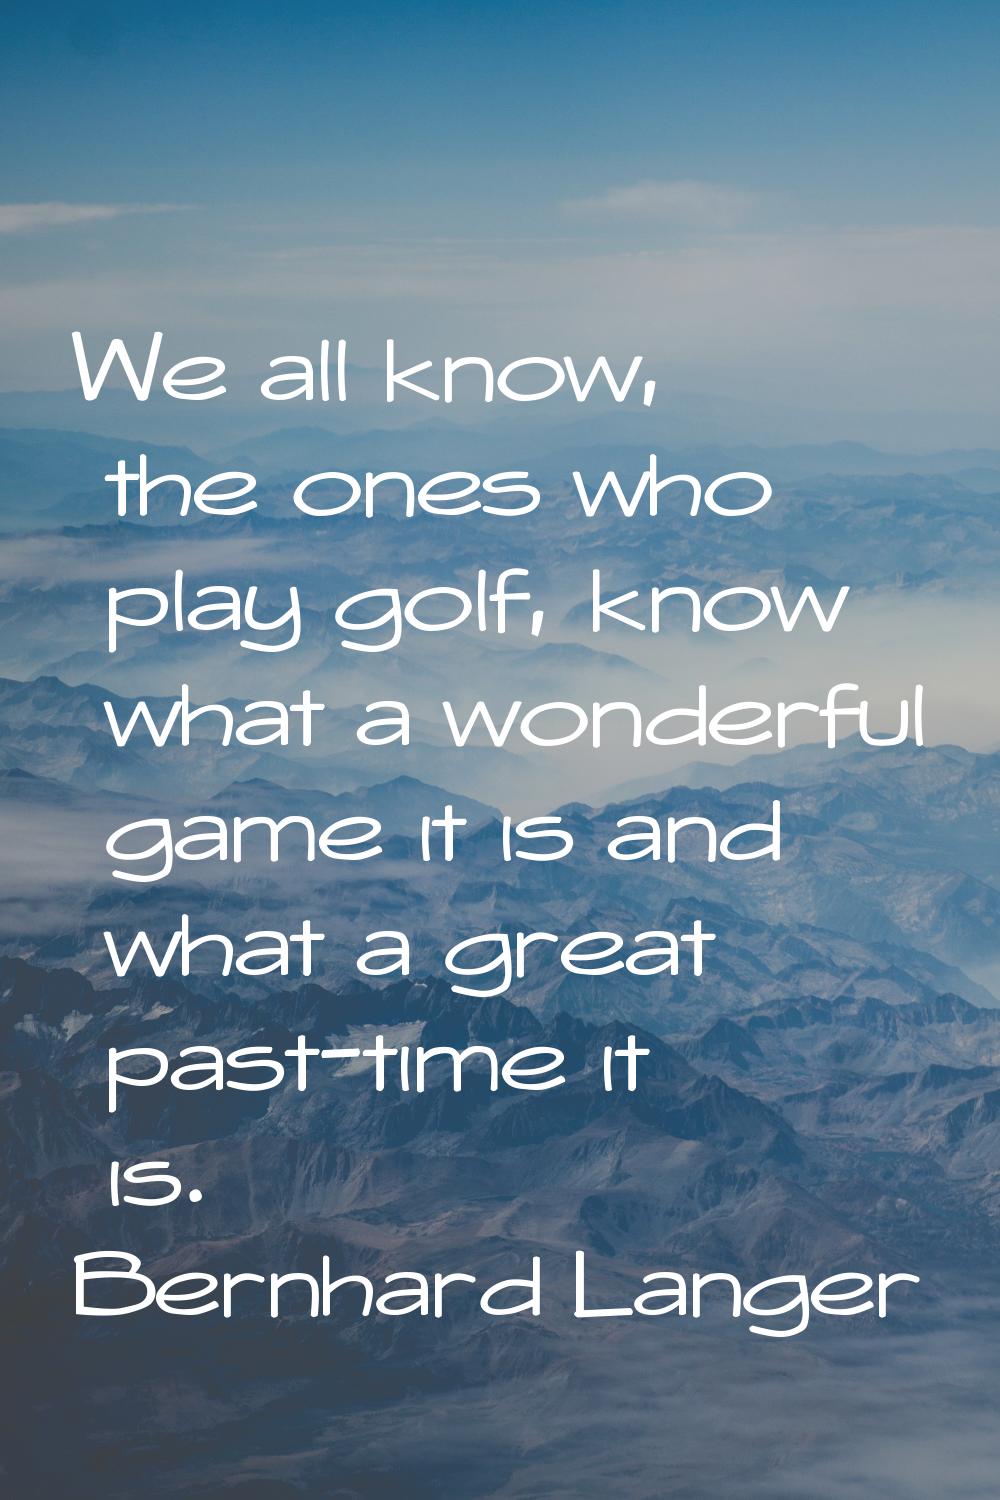 We all know, the ones who play golf, know what a wonderful game it is and what a great past-time it